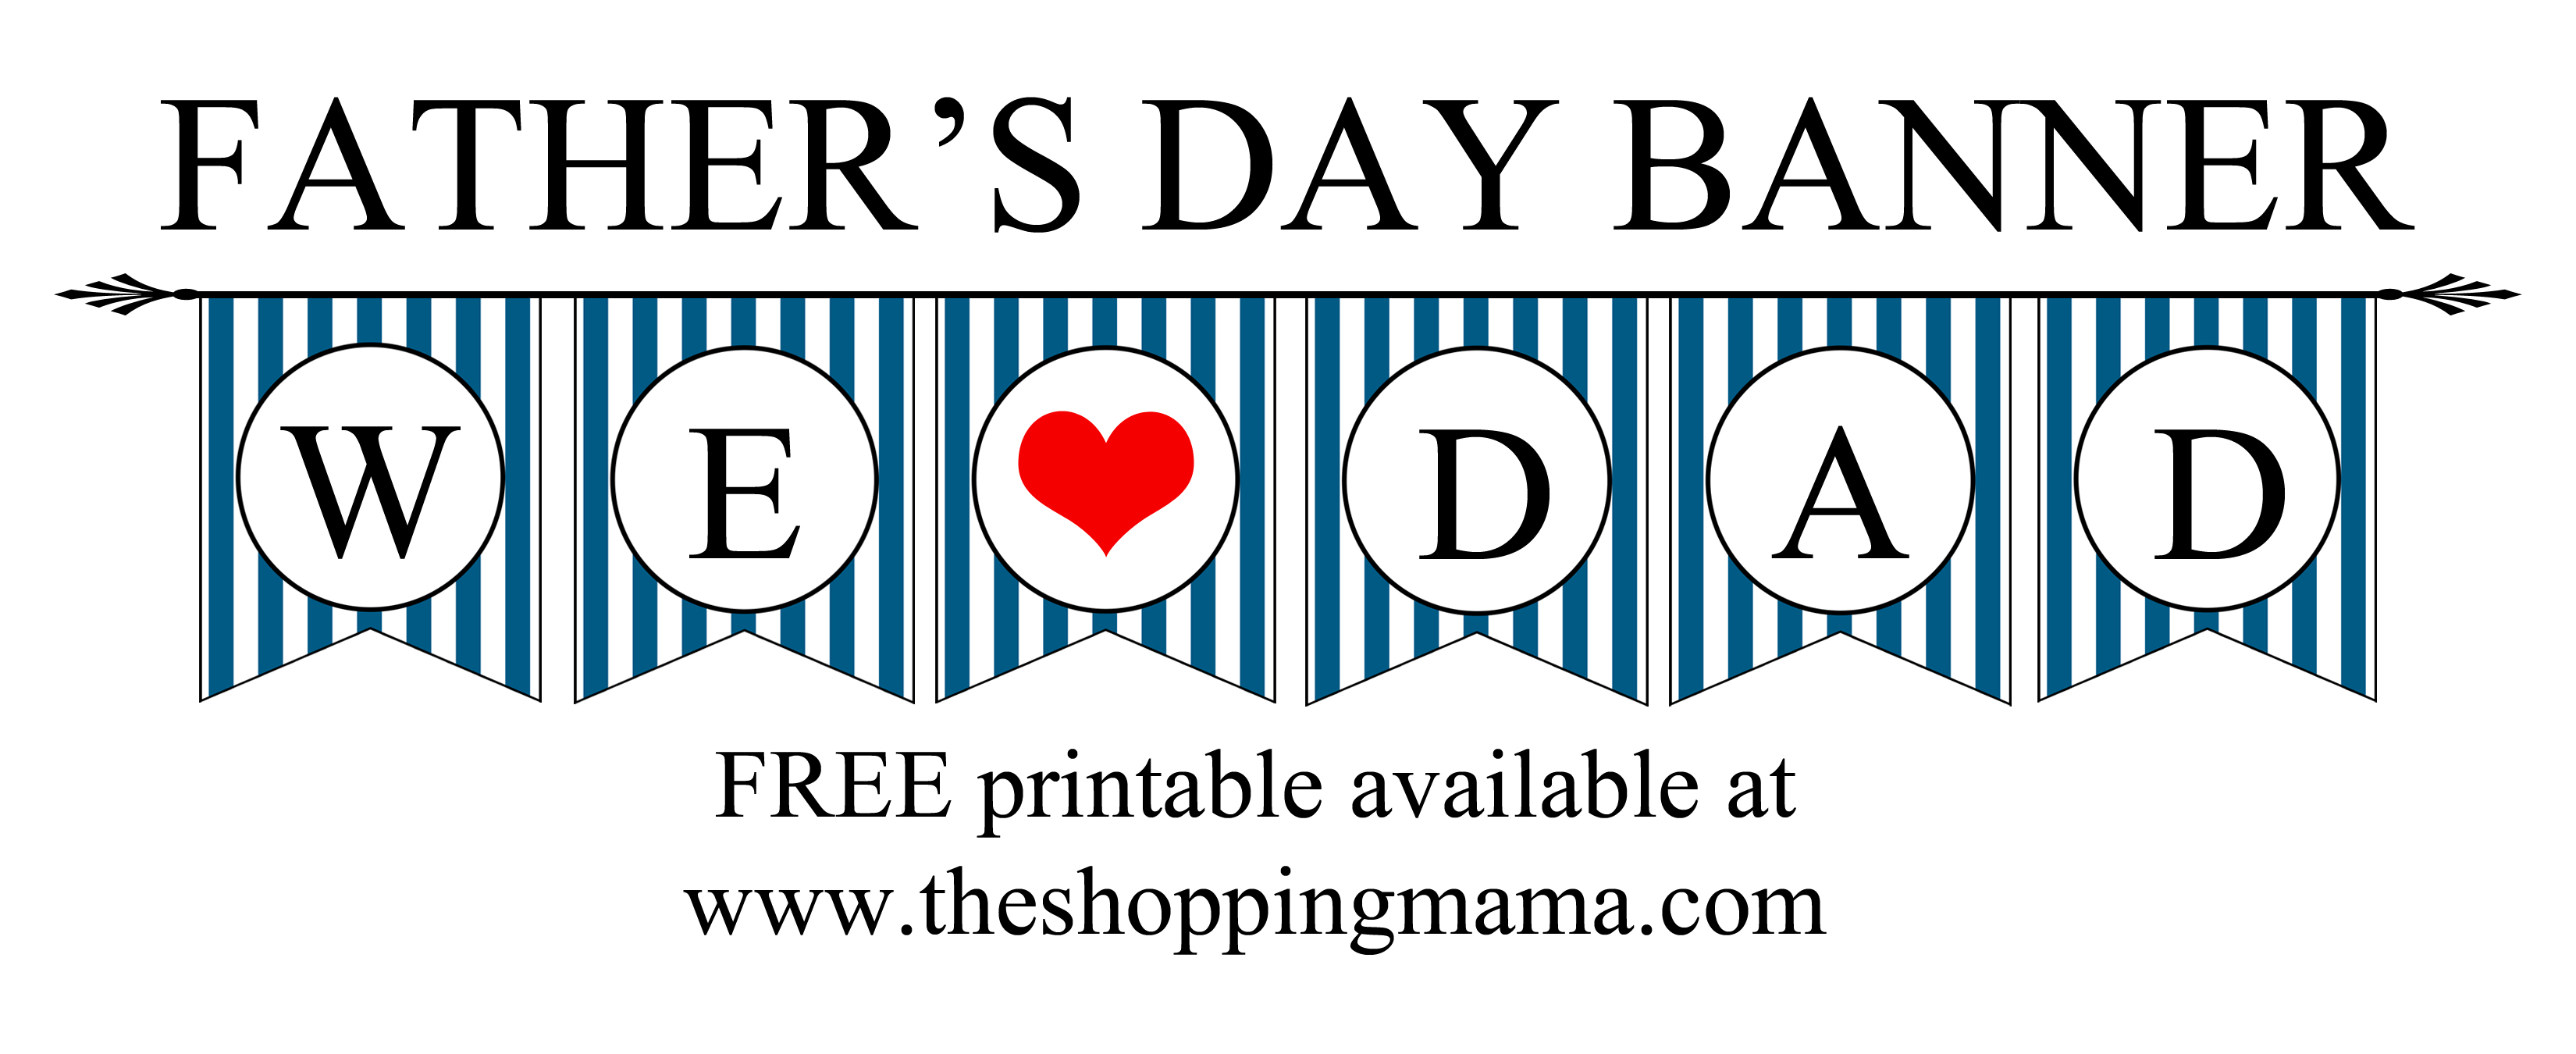 Happy Fathers Day Banner Free Printable Pdf